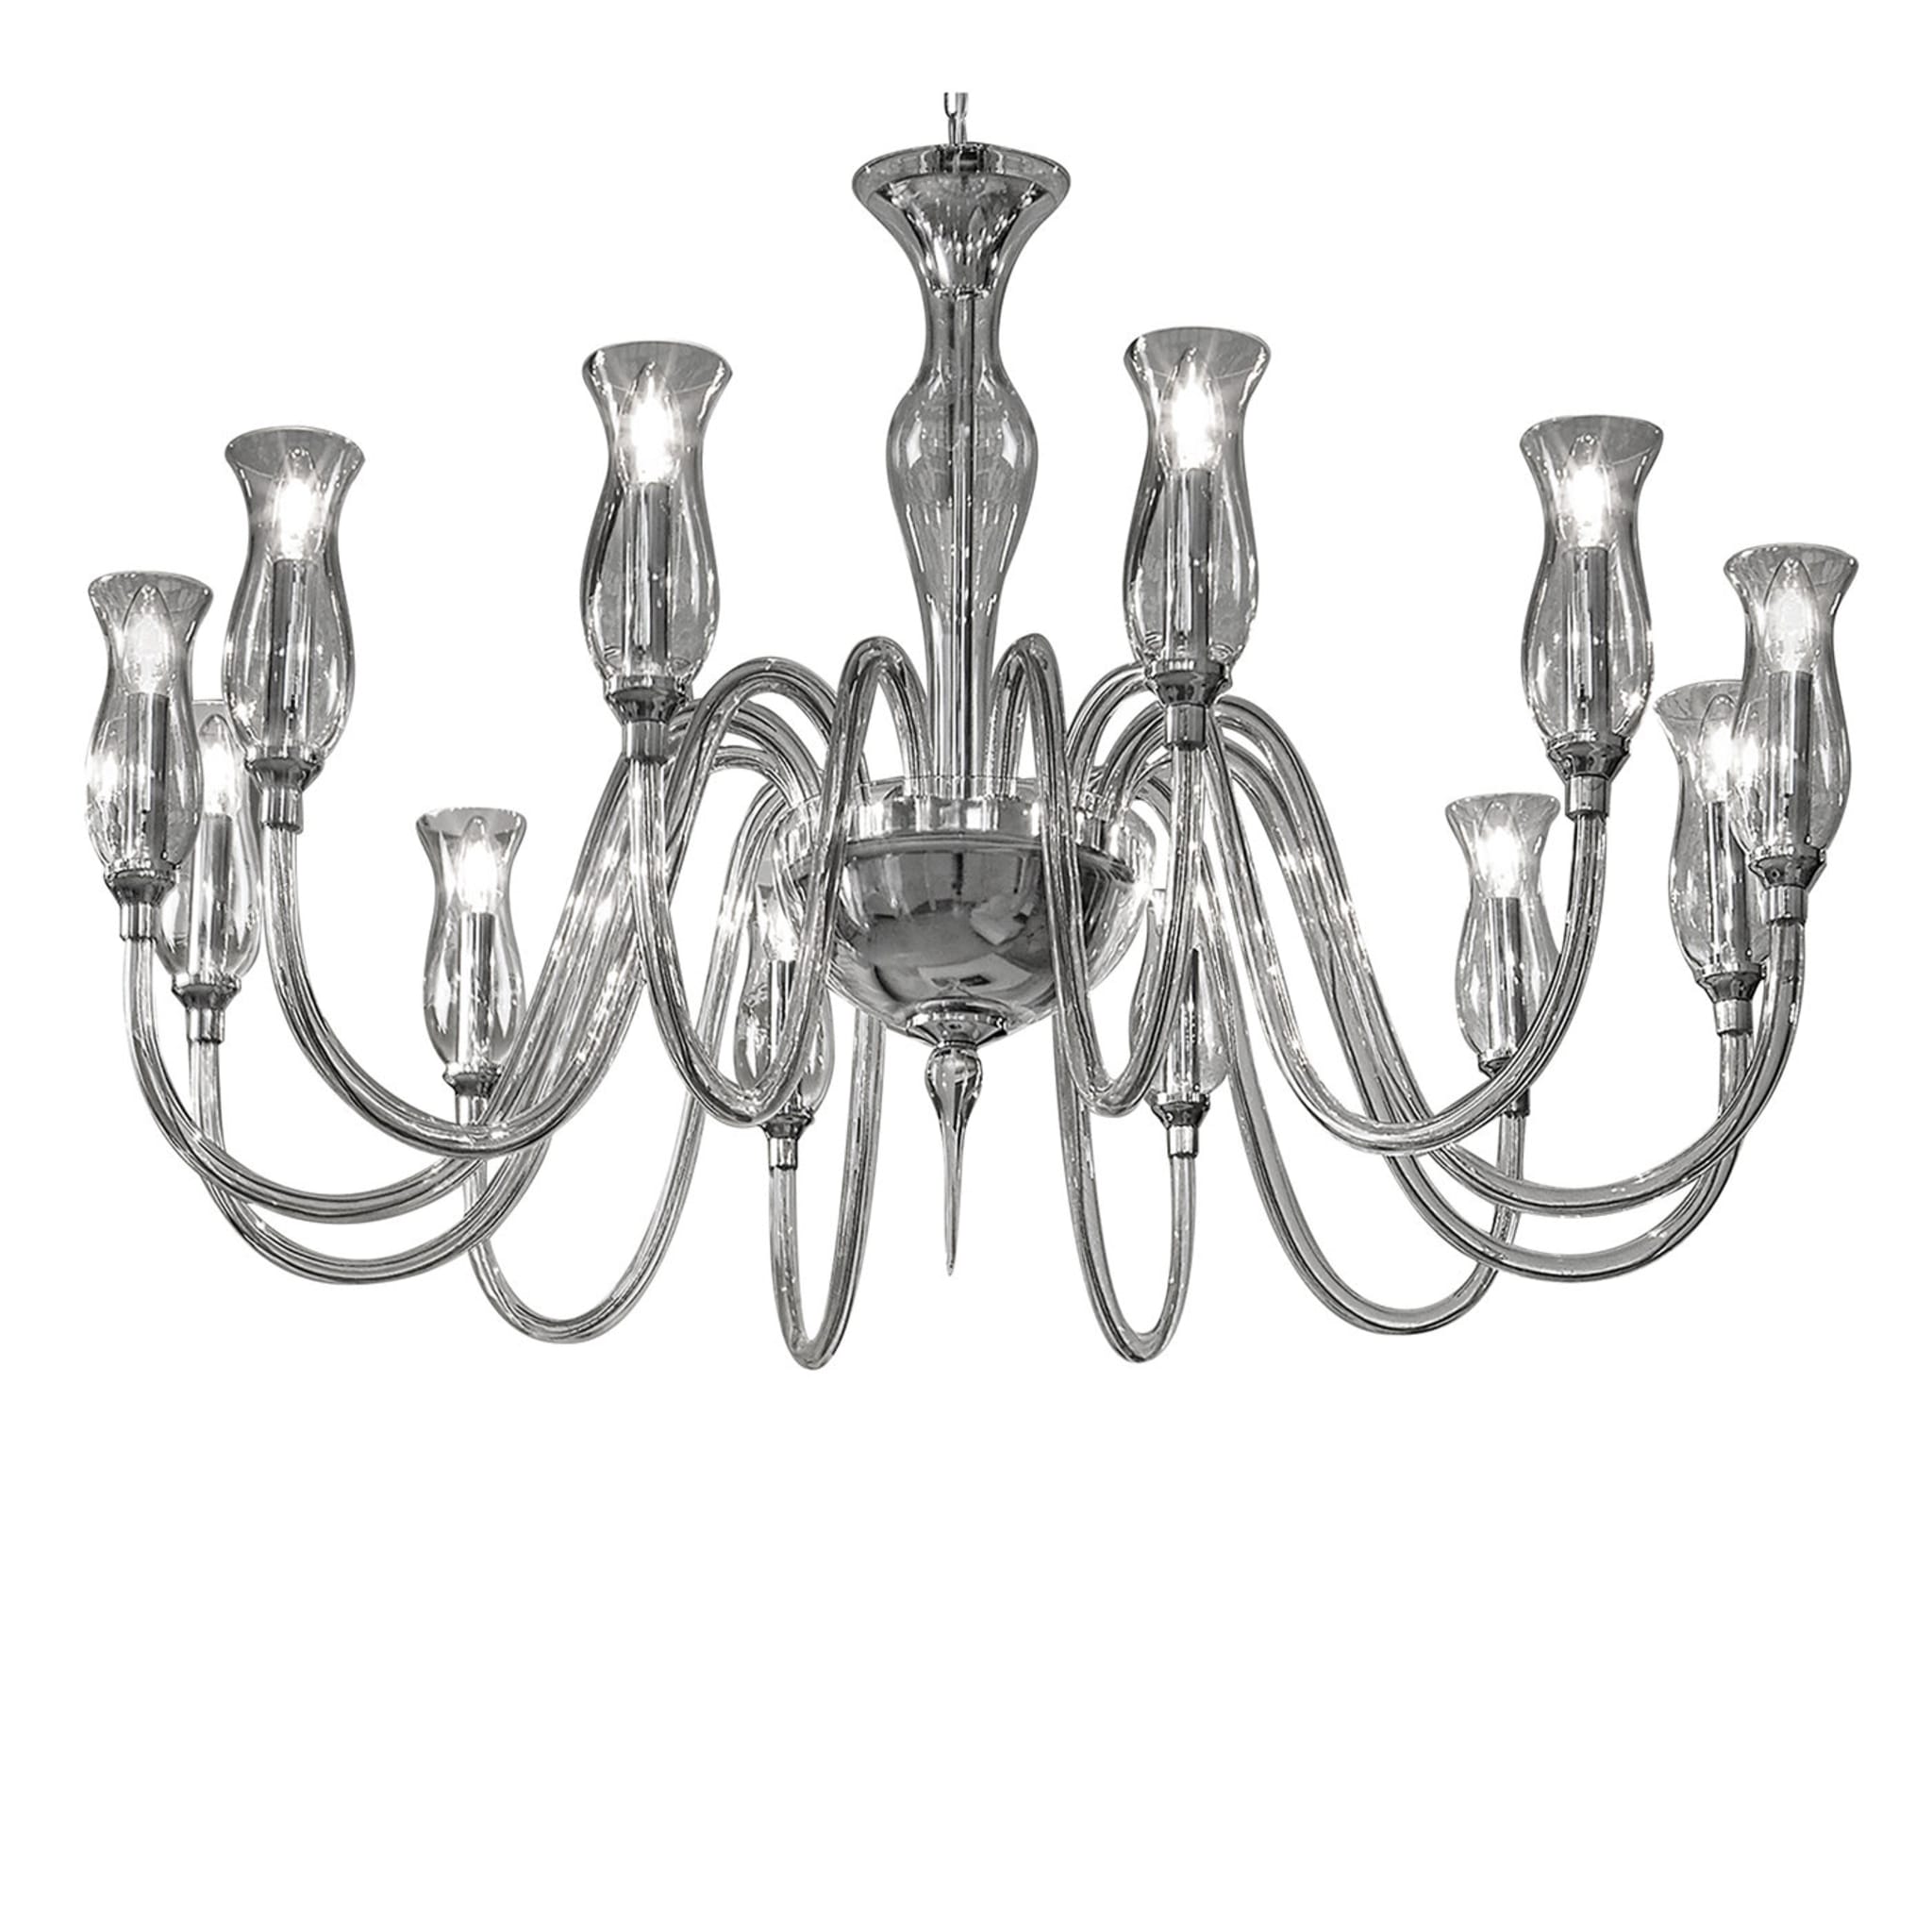 Teodato Crystal 12-Light Chandelier - Main view